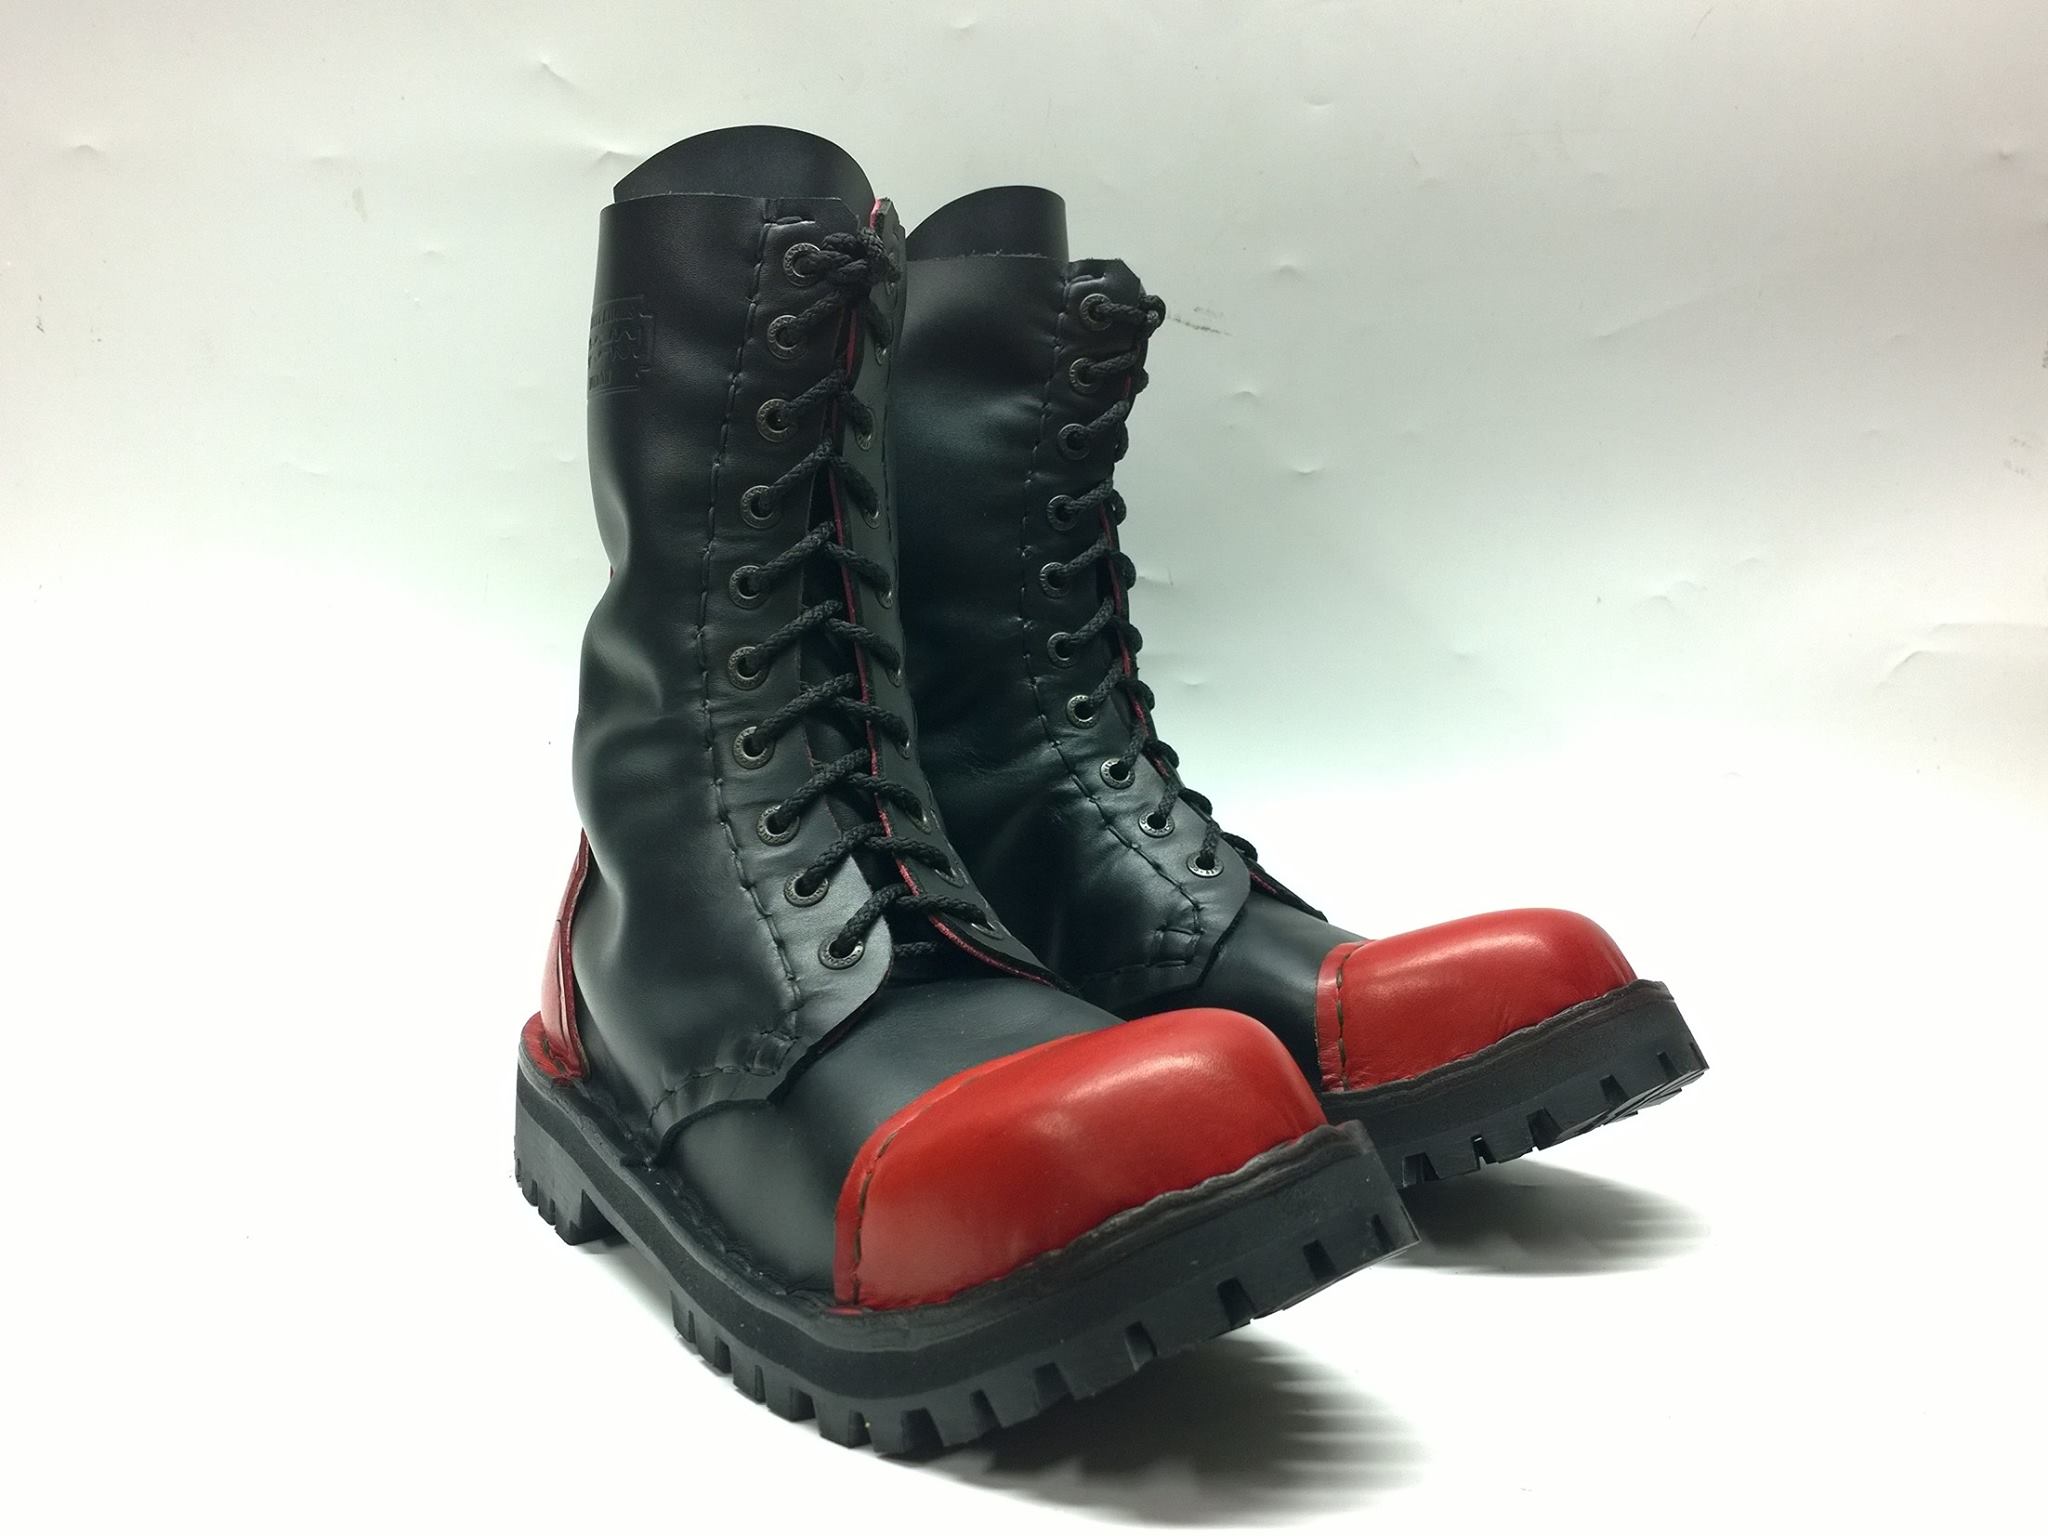 Cockney boots black & red